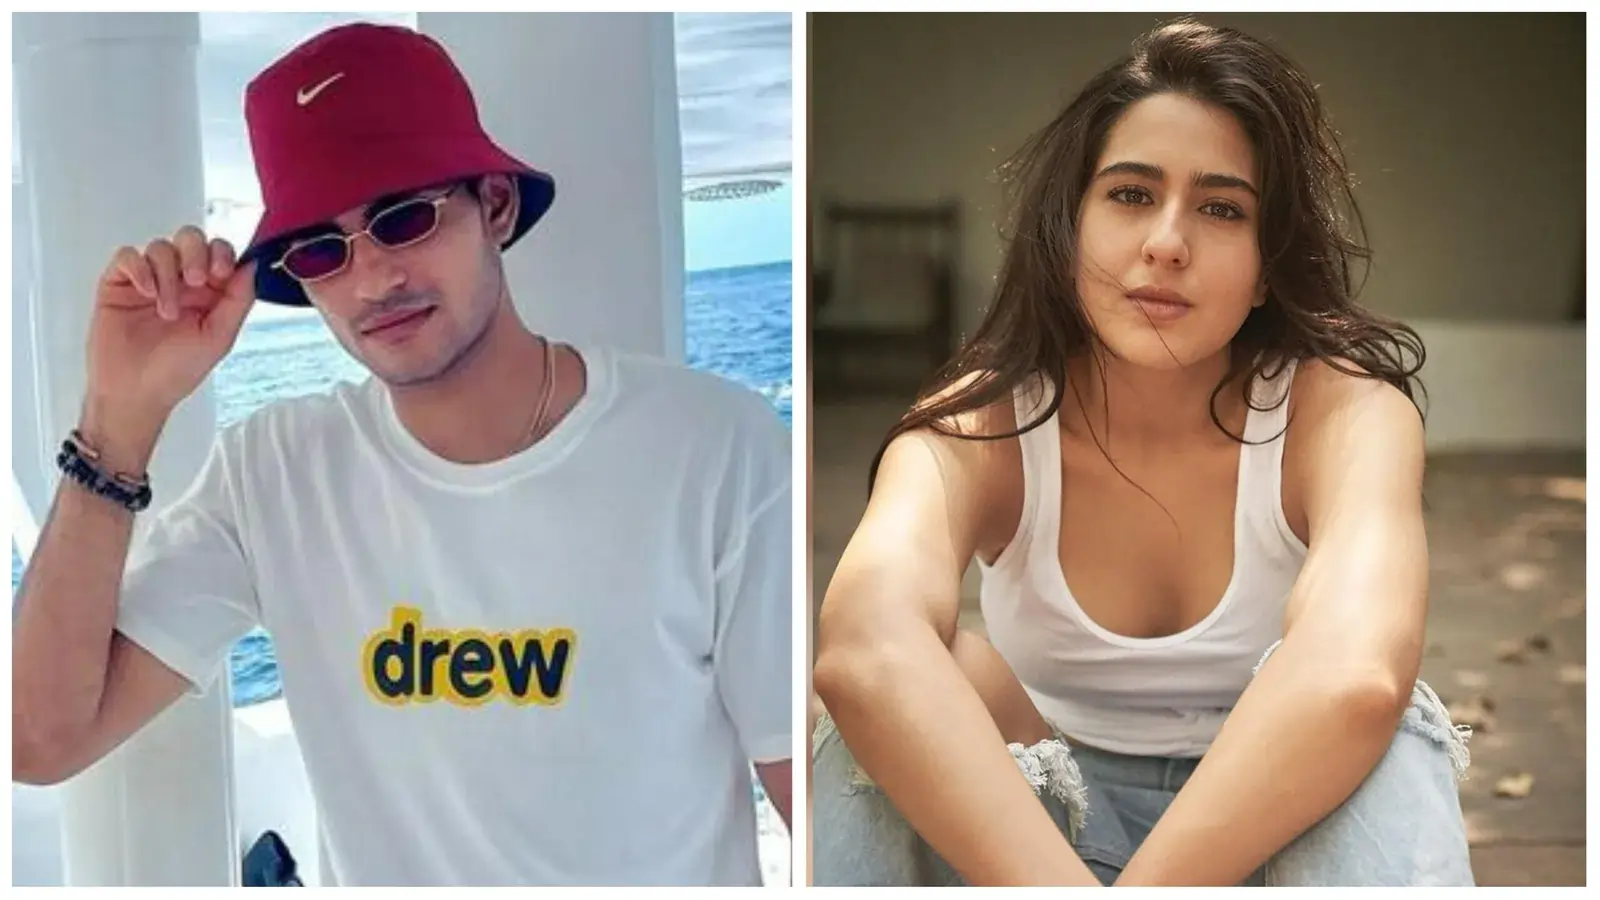 Sara Ali Khan and Shubman Gill unfollow each other on social media amidst breakup rumors and dating speculations